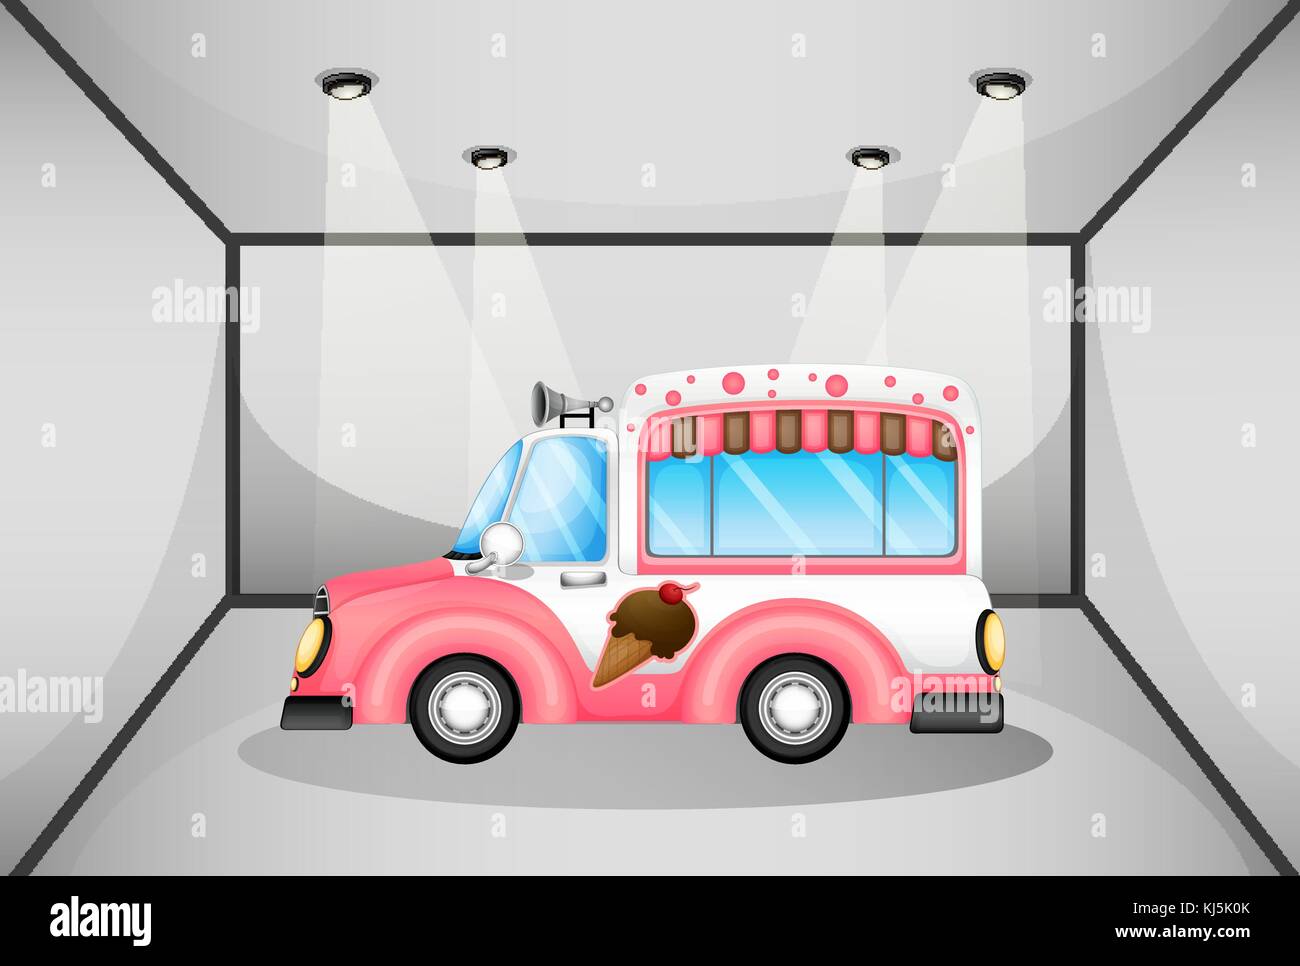 Illustration of a pink ice cream car inside the garage Stock Vector